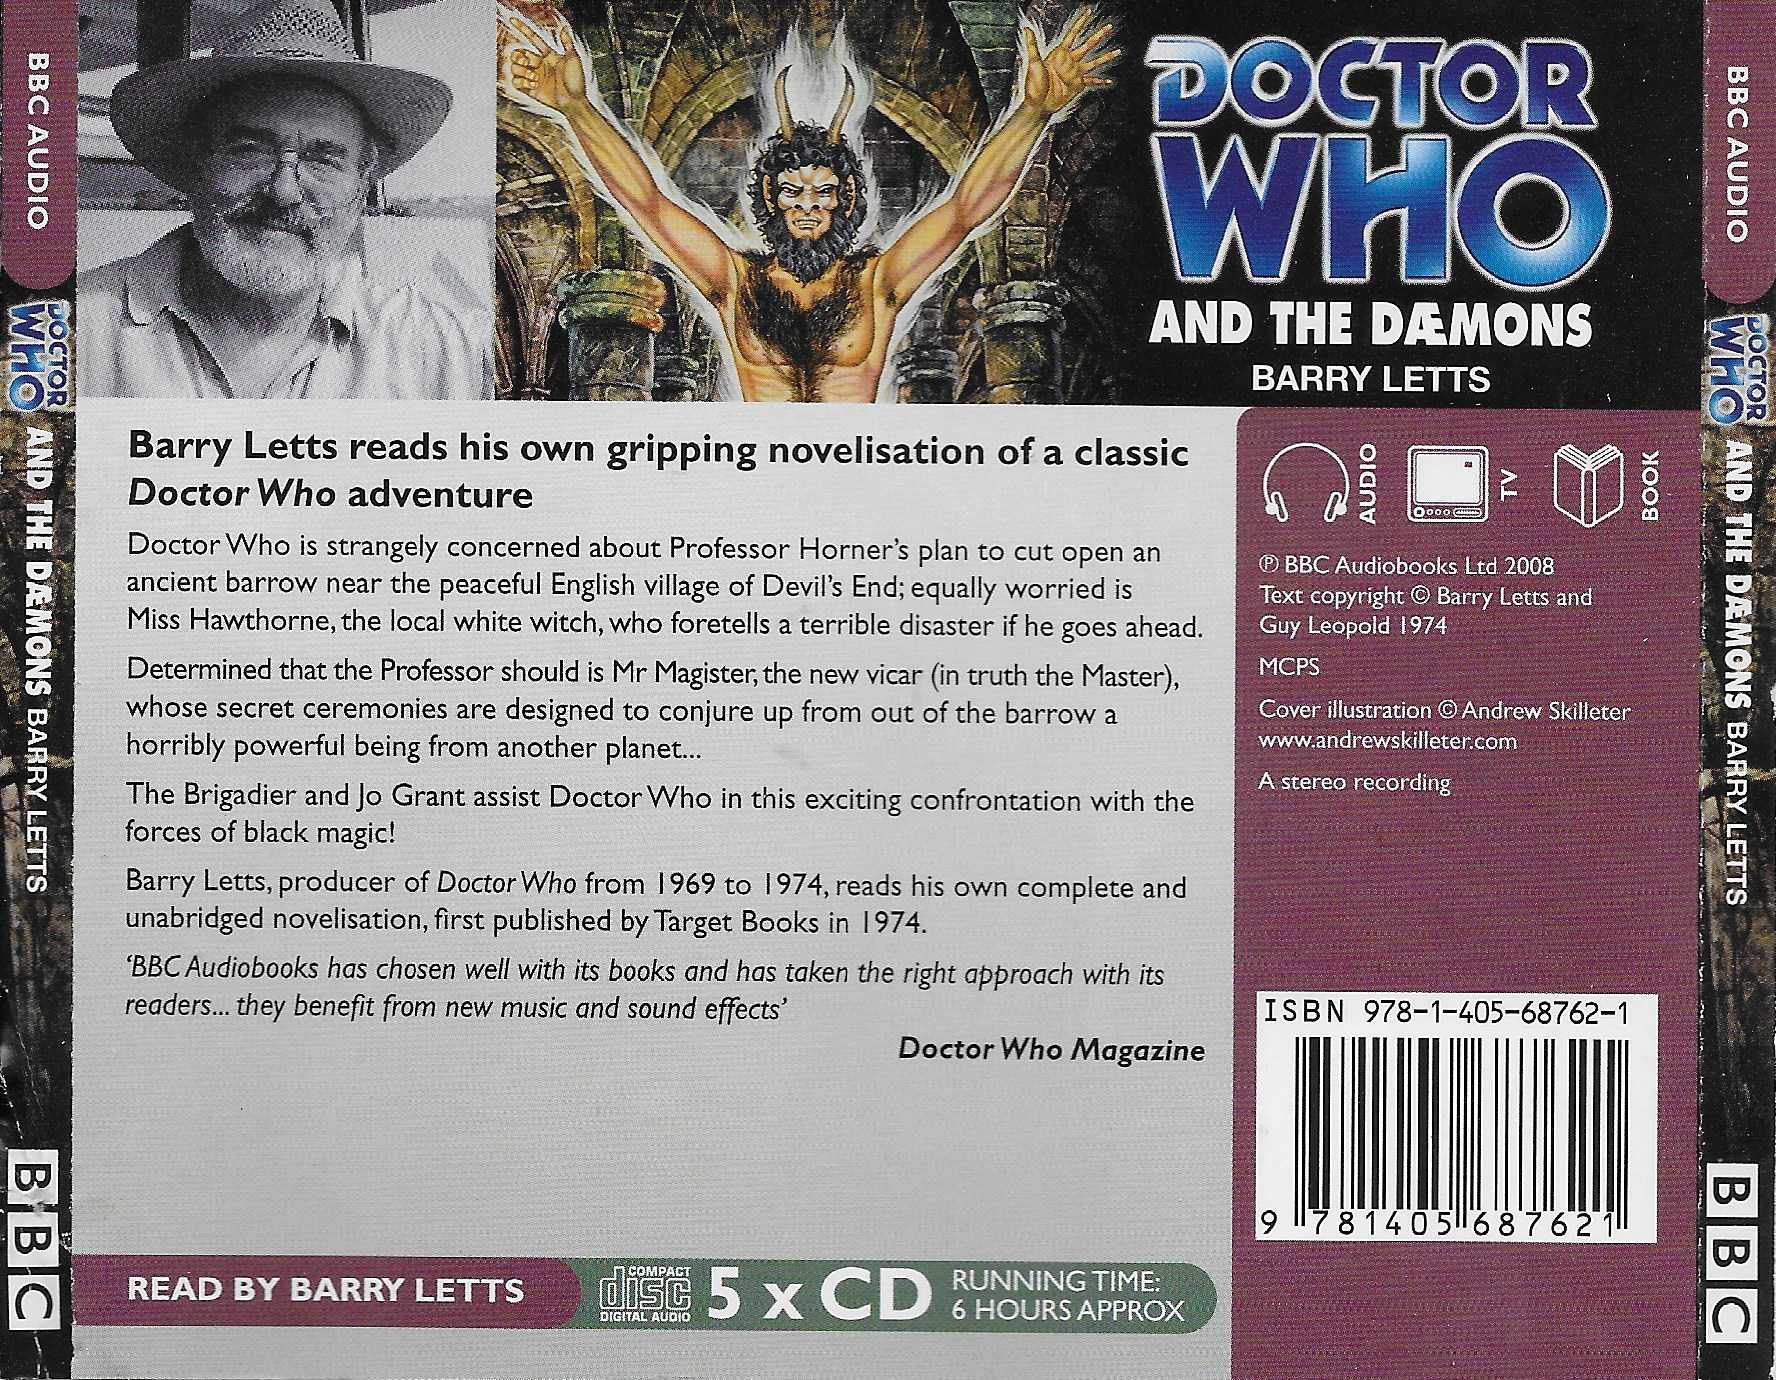 Picture of ISBN 978-1-405-68762-1 Doctor Who - And the Daemons by artist Barry Letts / Guy Leopold from the BBC records and Tapes library